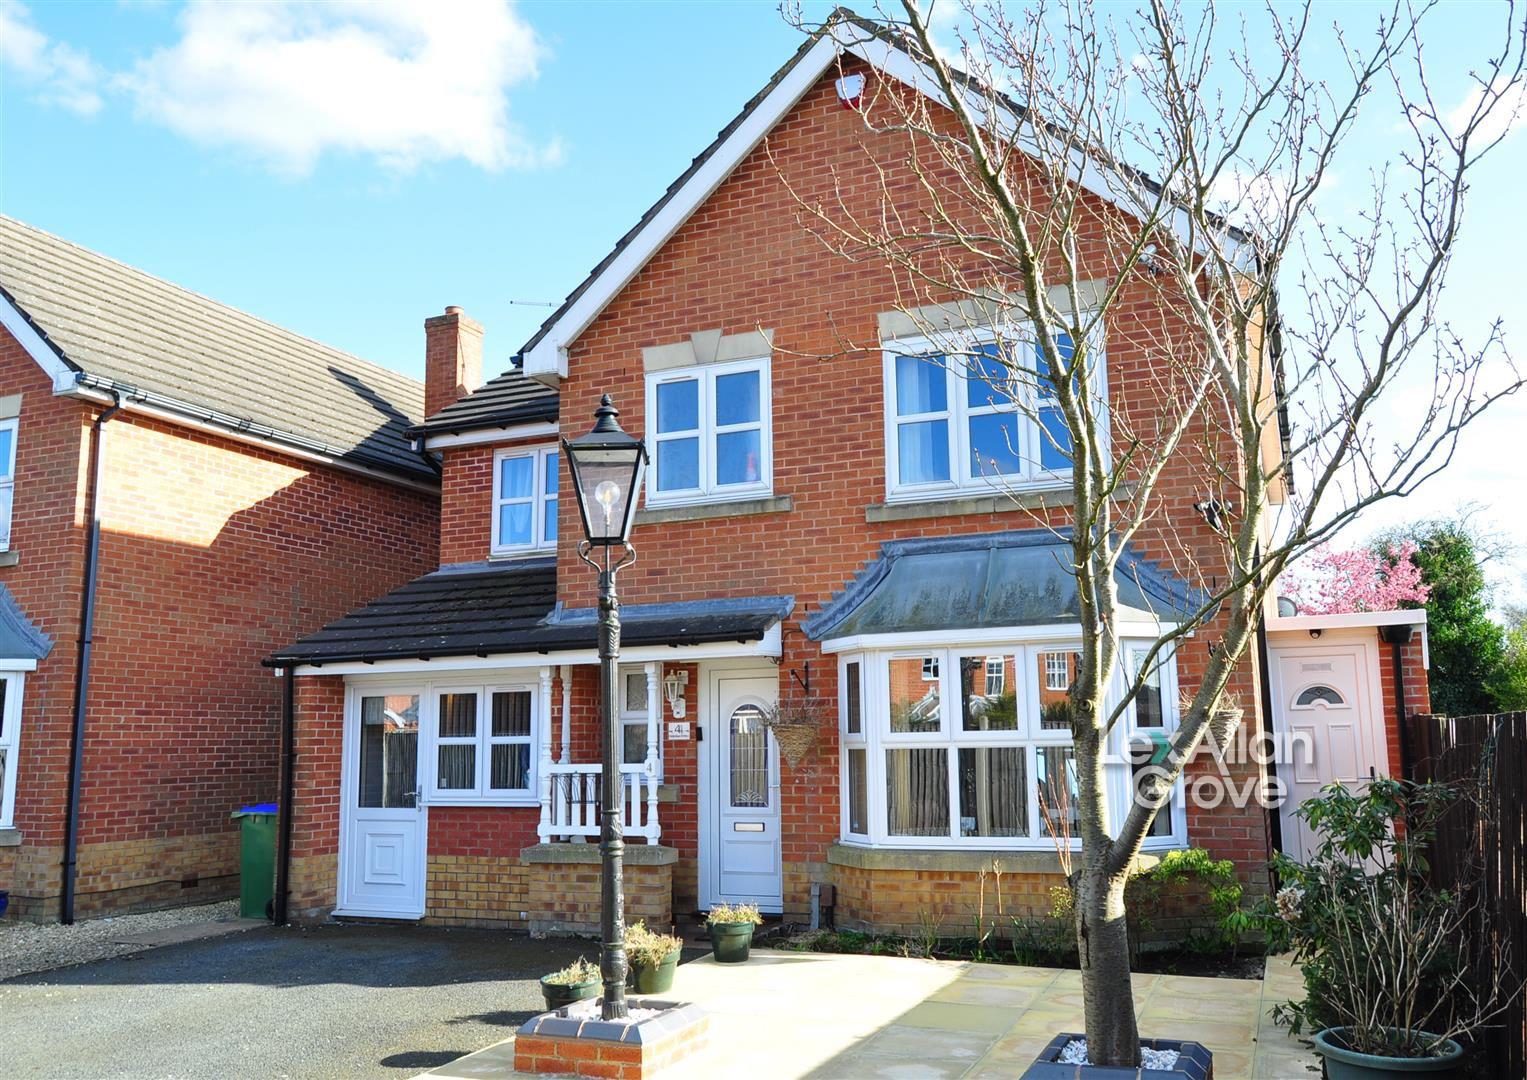 4 bed detached house for sale in Matthews Close, Rowley Regis, B65 